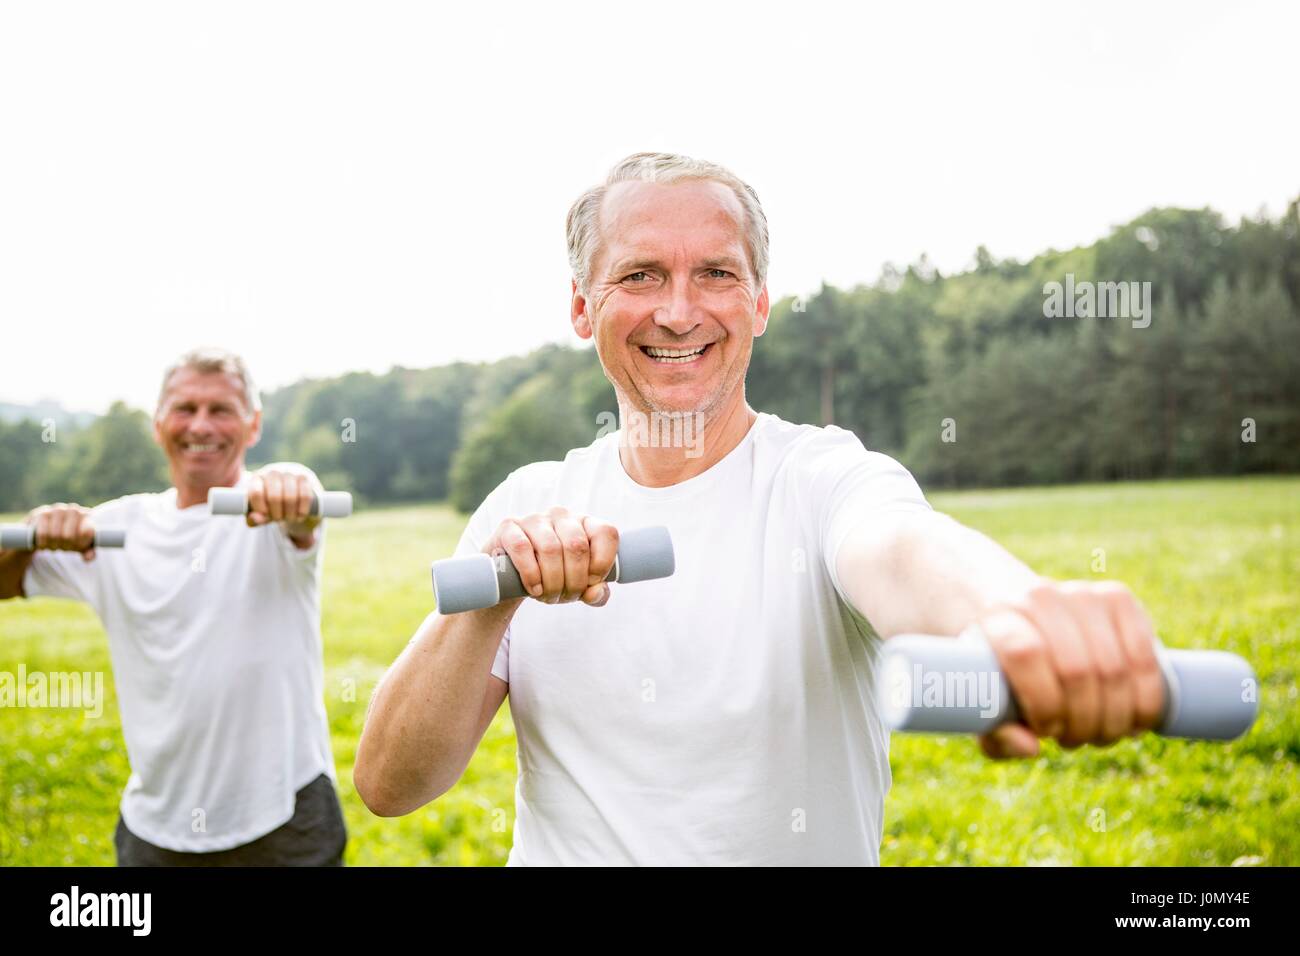 Two men exercising with hand weights. Stock Photo